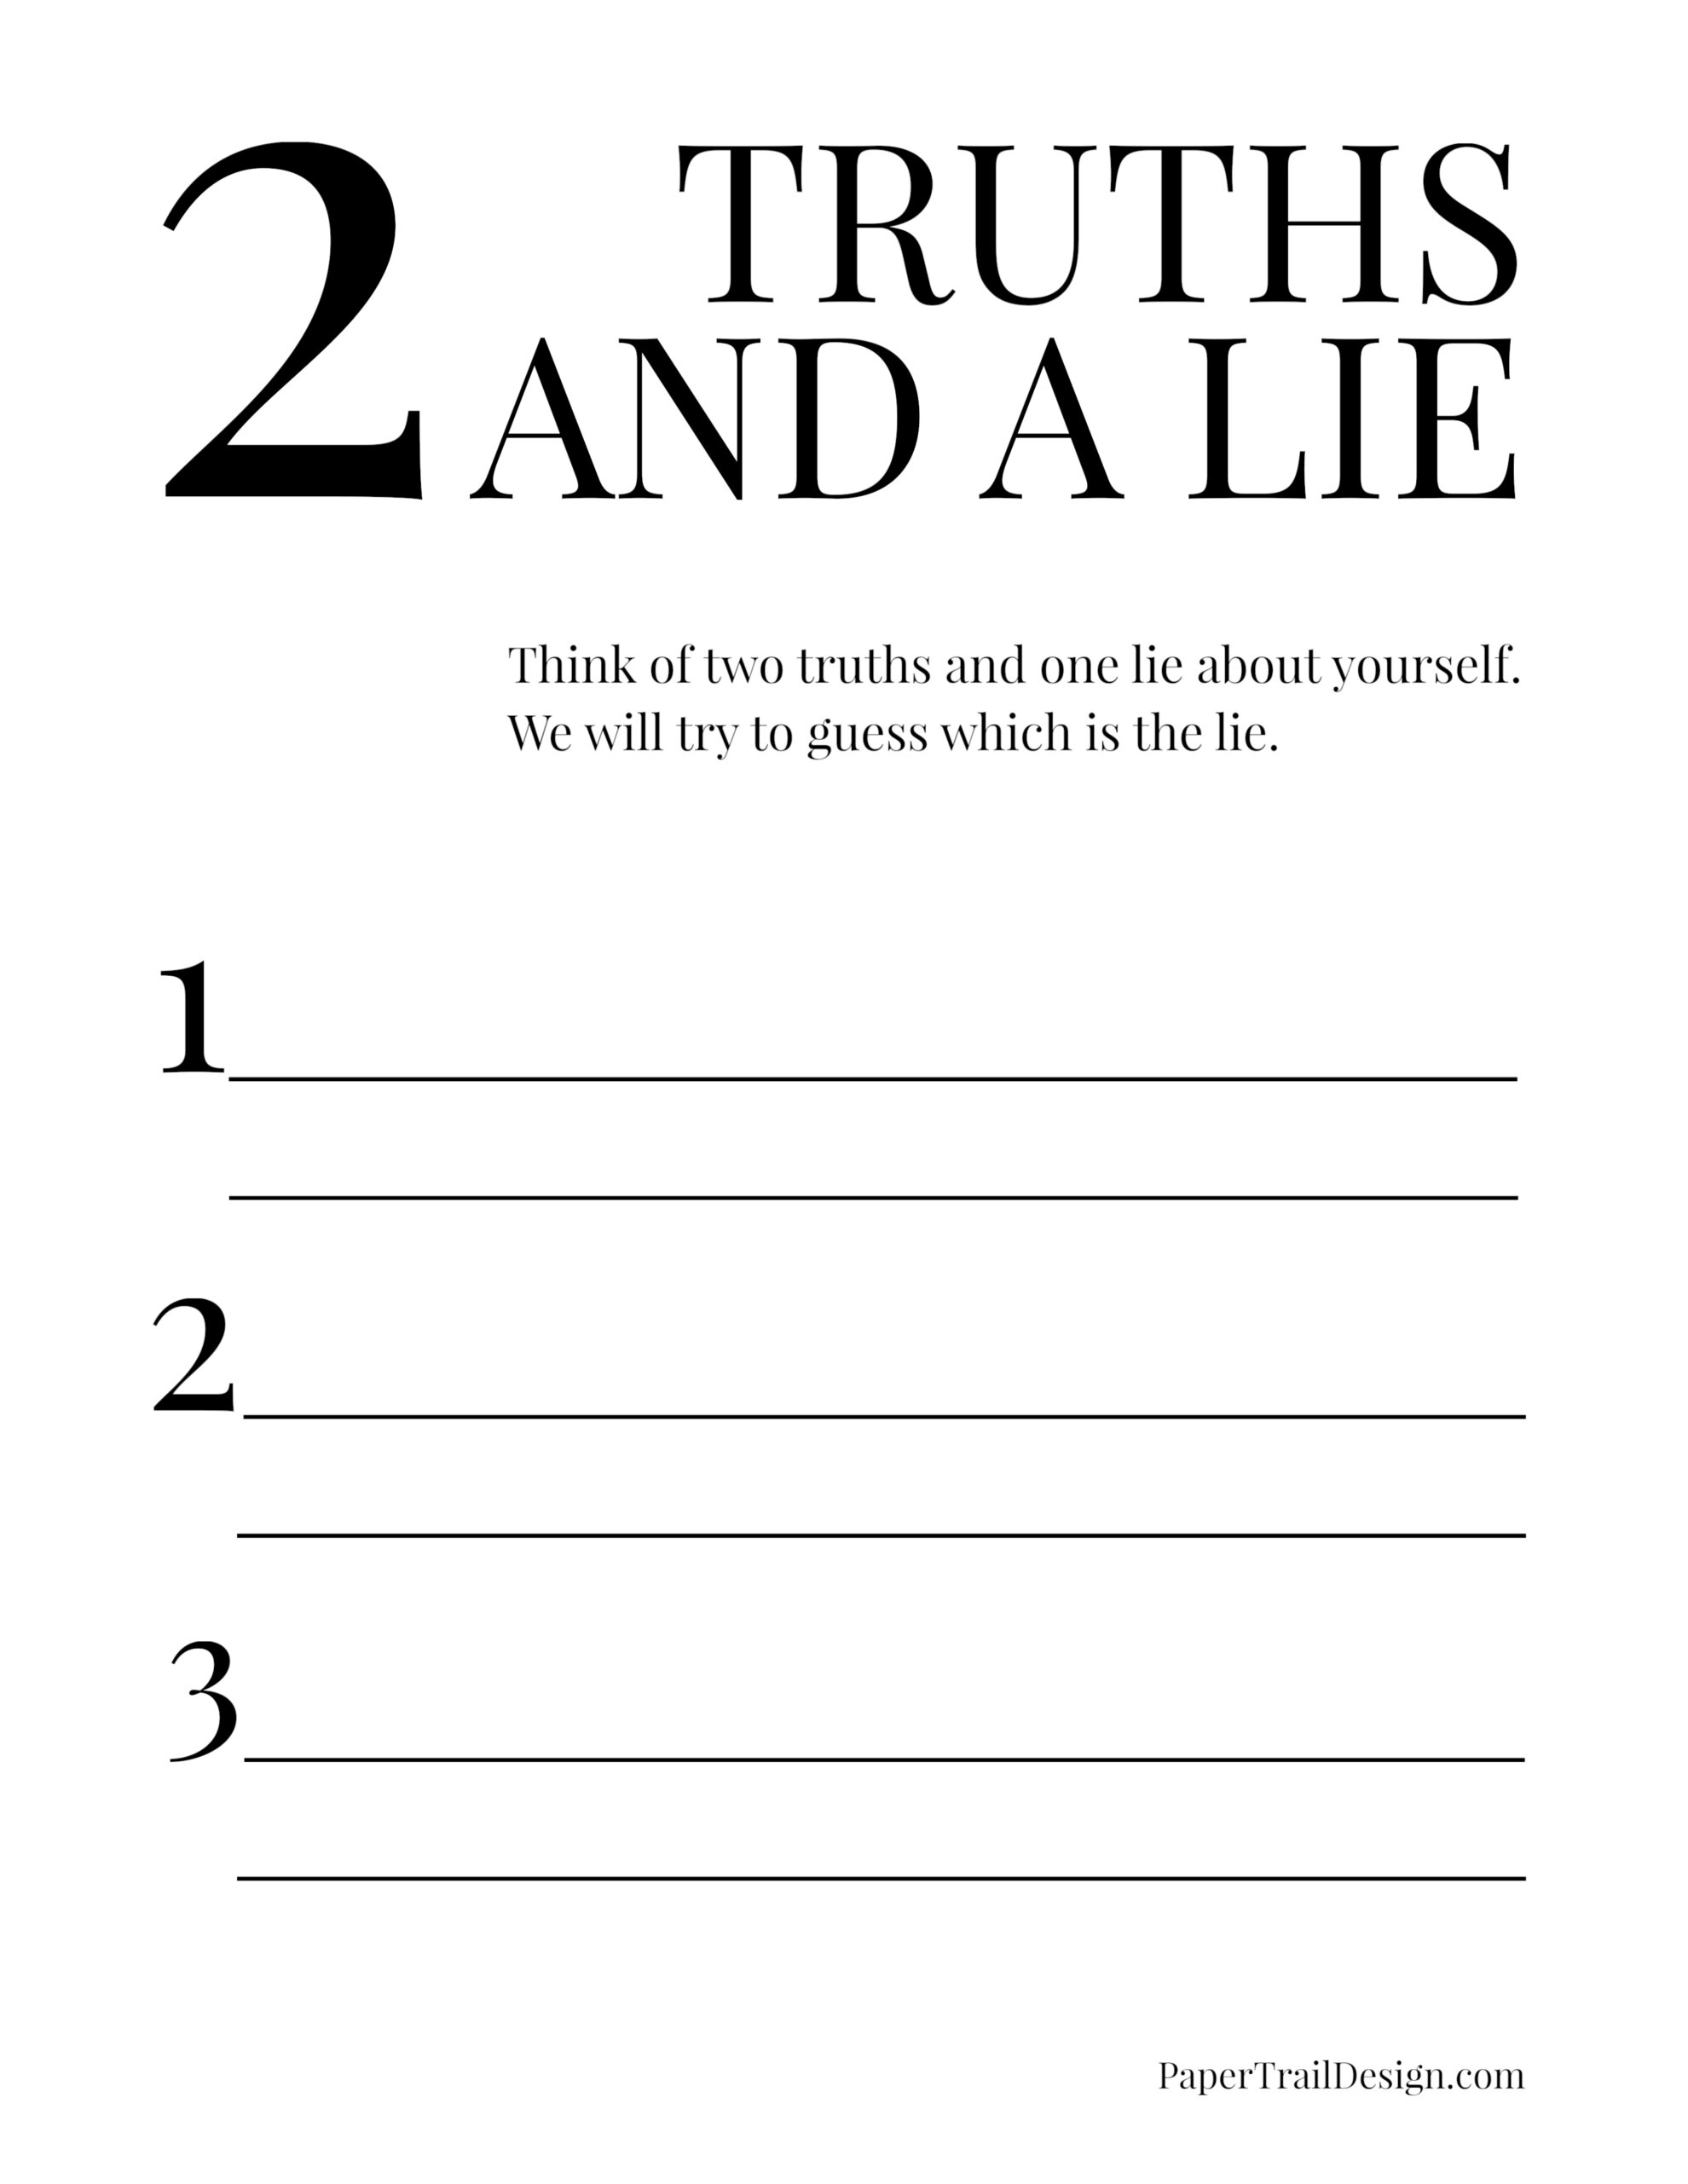 two-truths-and-a-lie-game-free-printable-paper-trail-design